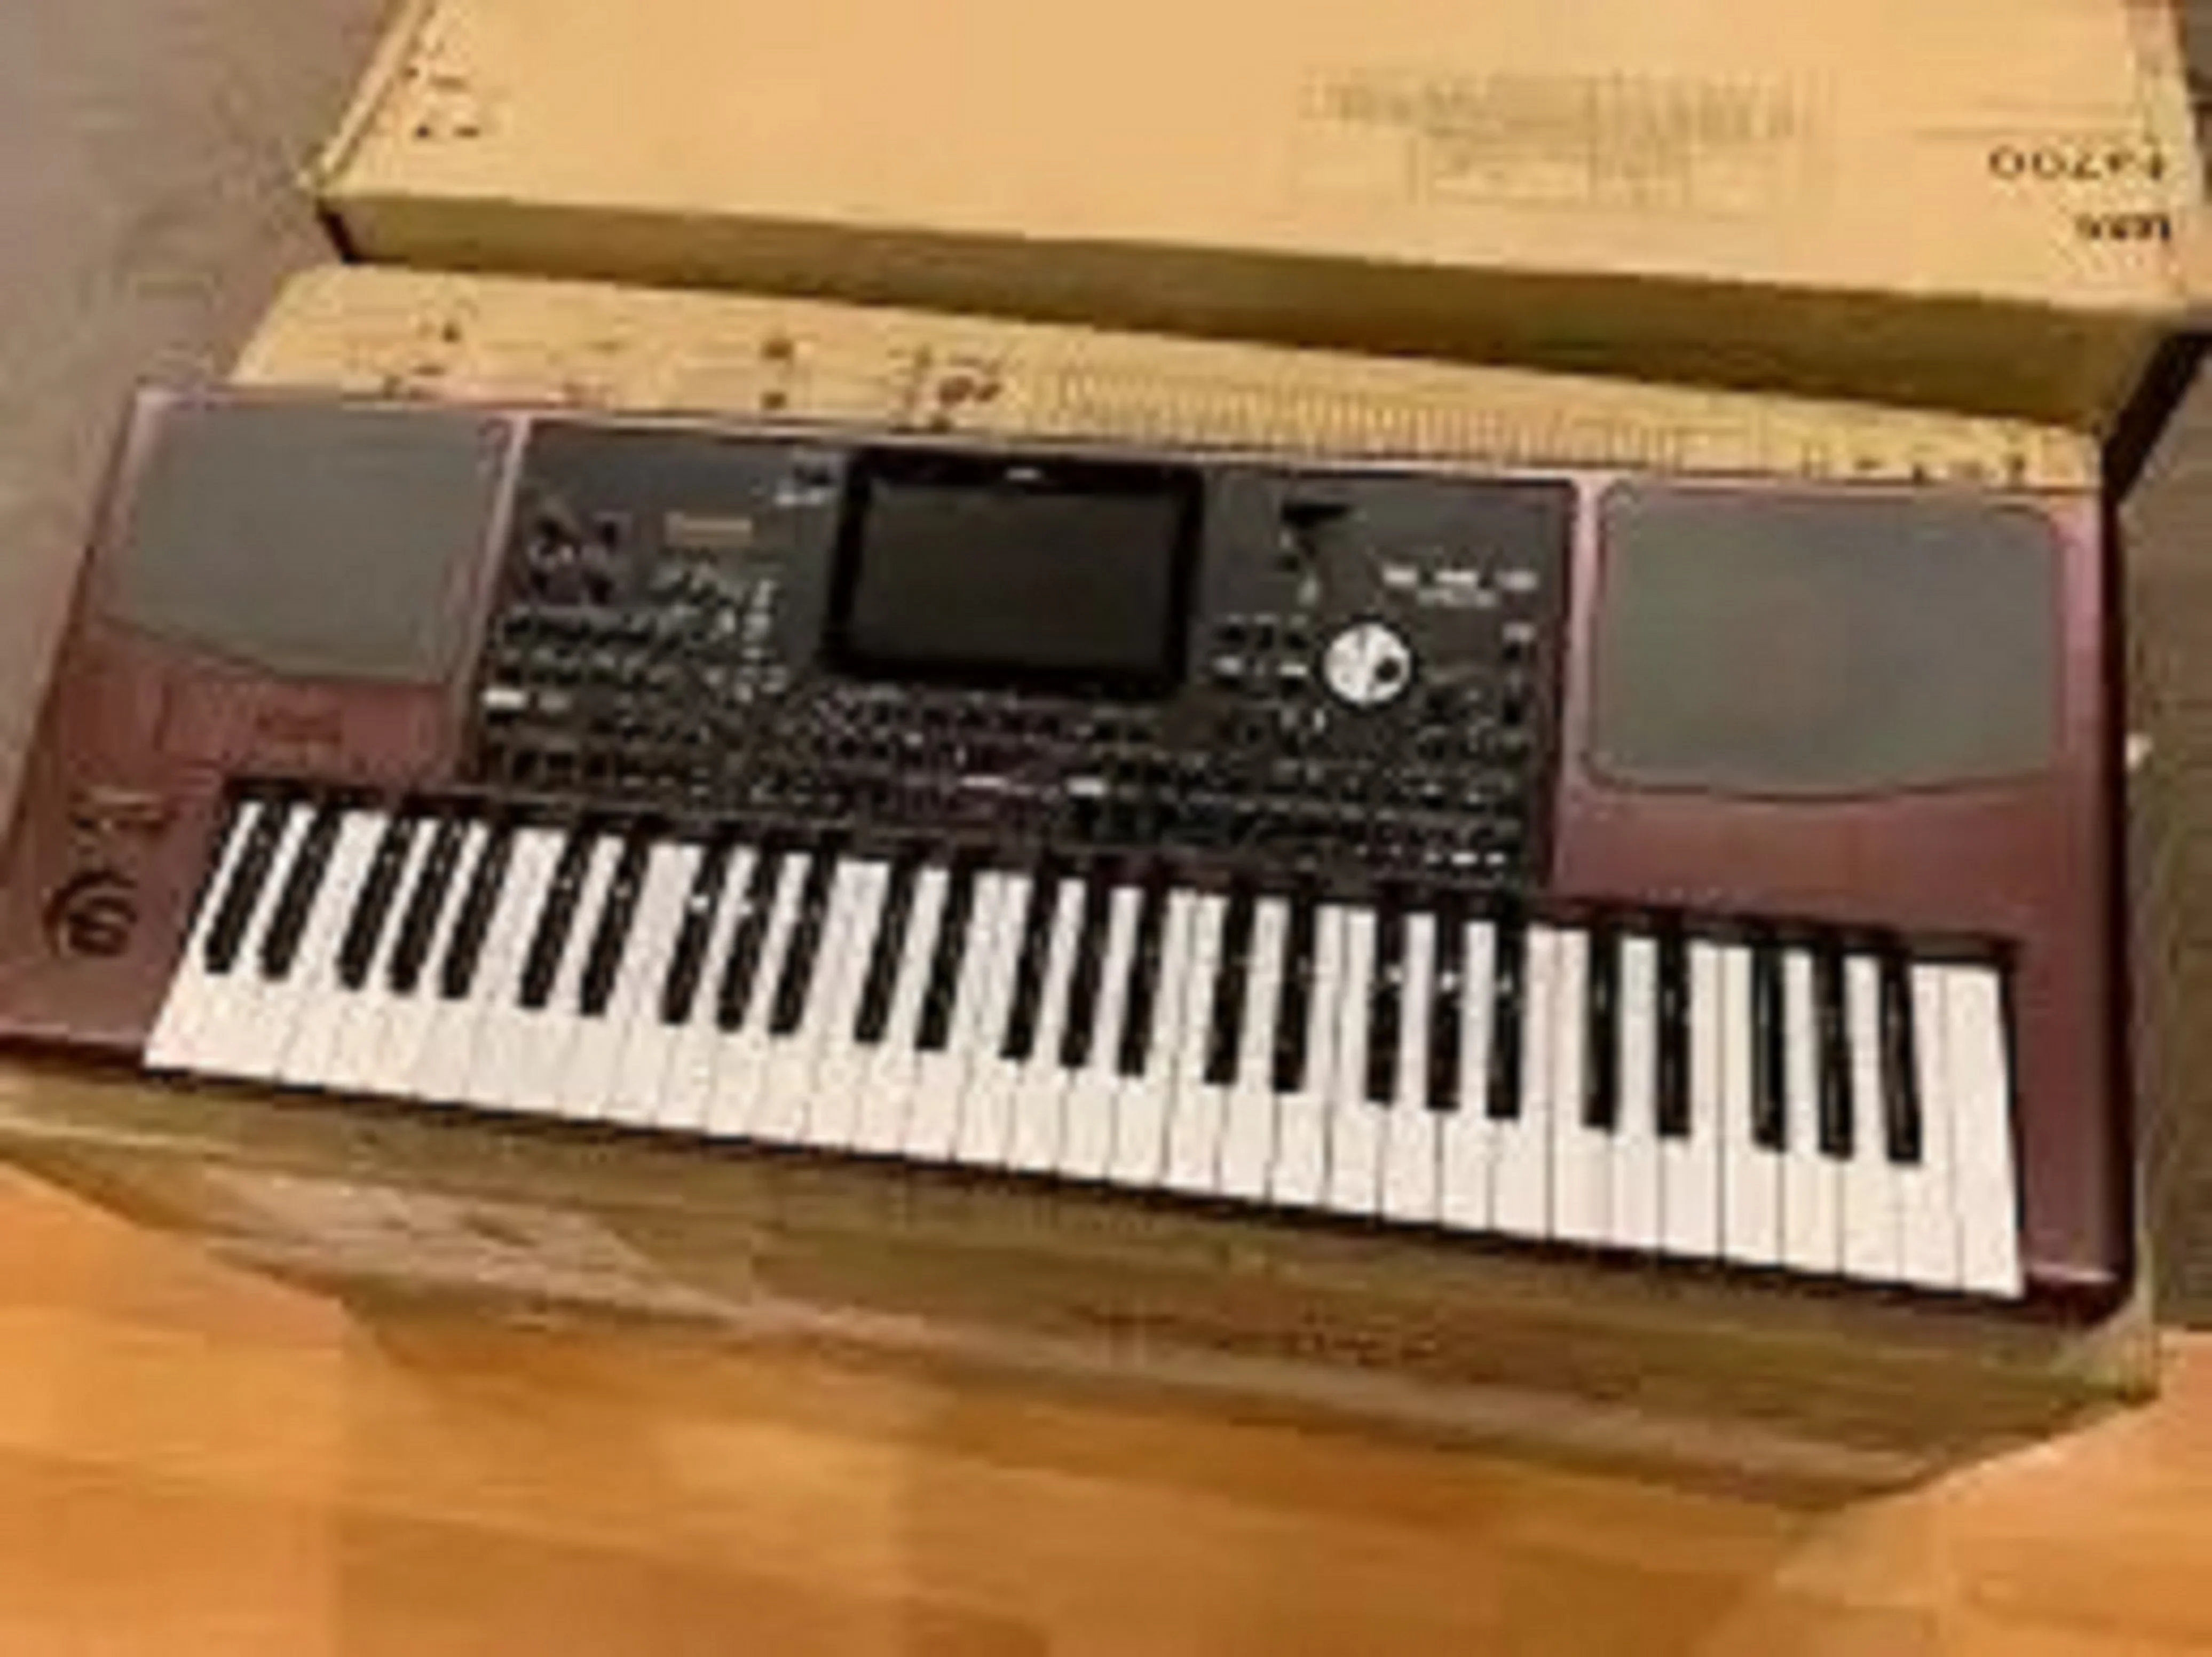 

@@@@@@New Korg PA1000 PA800 PA700 PA600 61-Key Professional High Performance Arranger PA-1000 Available Discount Brand New